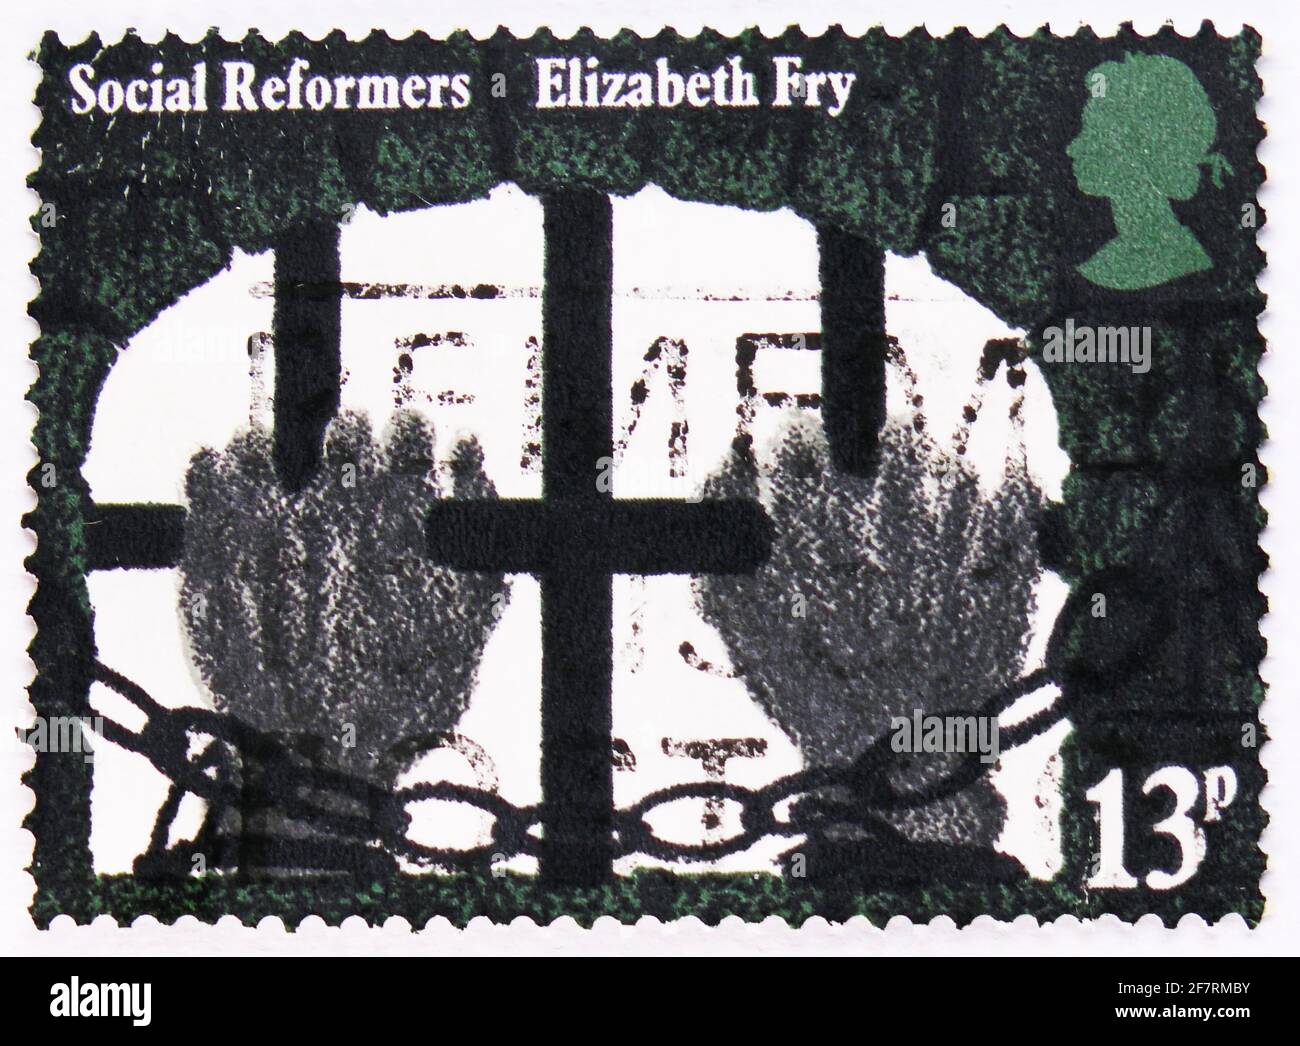 MOSCOW, RUSSIA - JANUARY 17, 2021: Postage stamp printed in United Kingdom shows Hands clutching Prison Bars (Elizabeth Fry), Social Reformers serie, Stock Photo